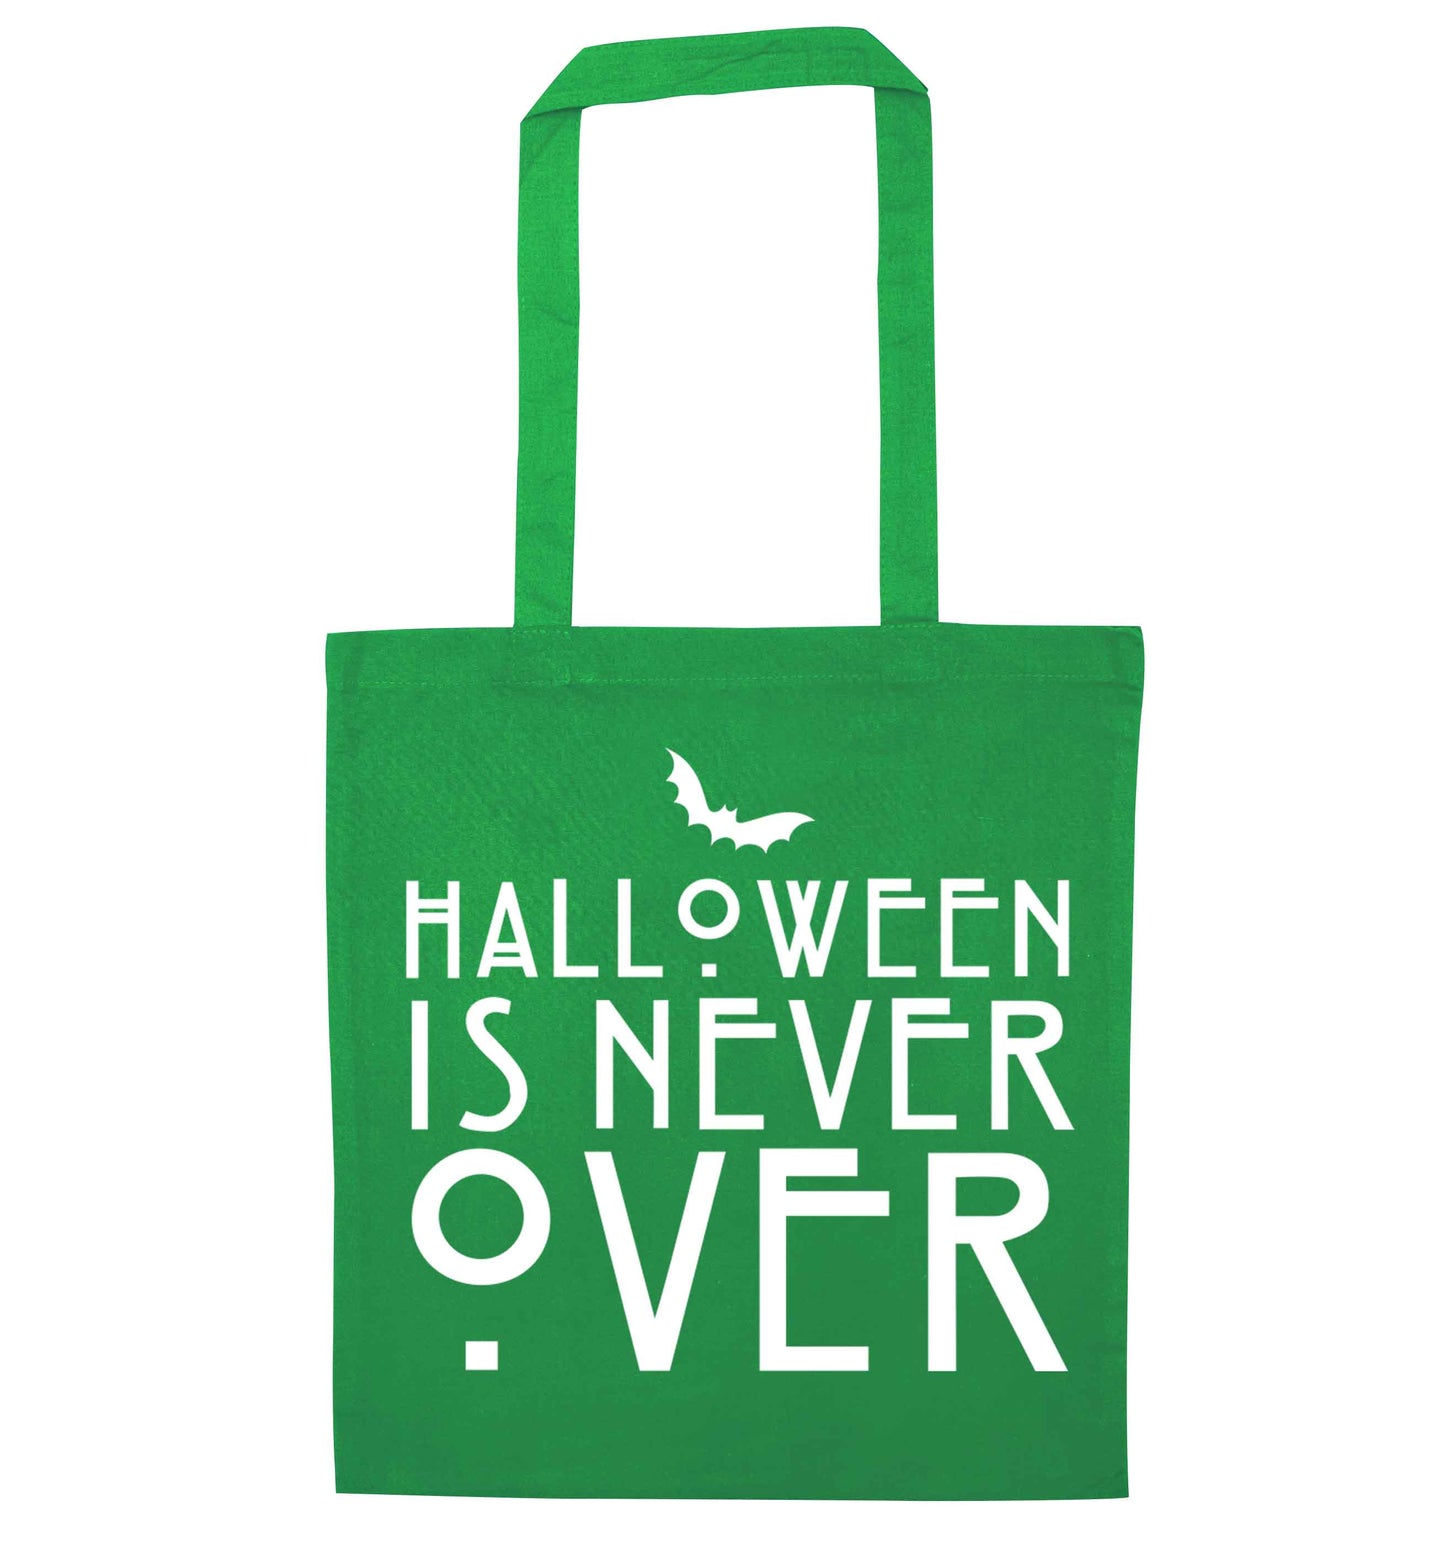 Halloween is never over green tote bag